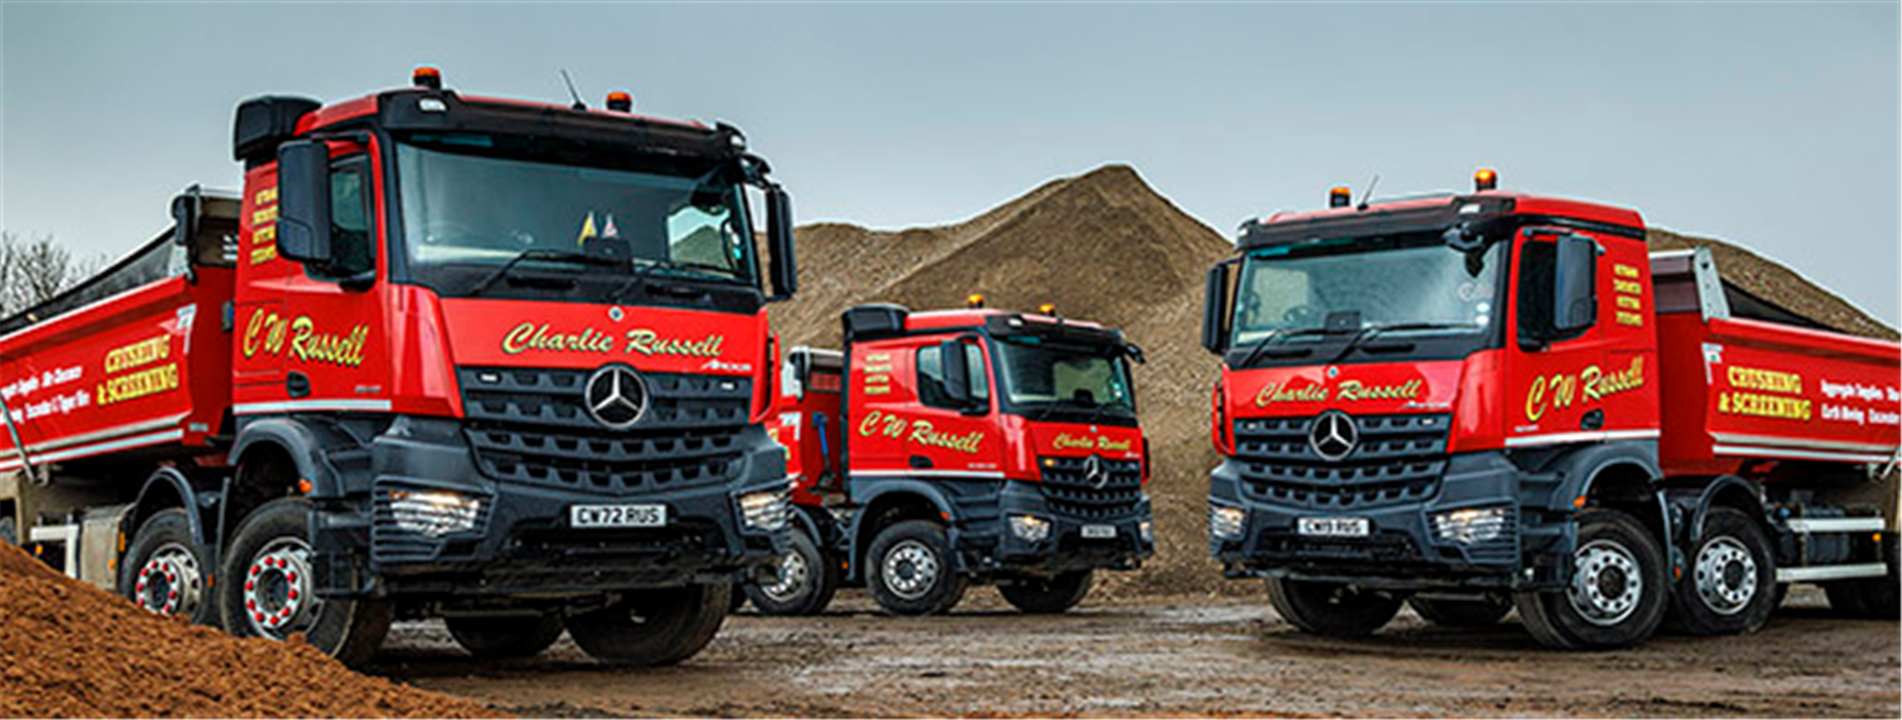 Rugged Mercedes-Benz Arocs muscles in to CW Russell’s fleet